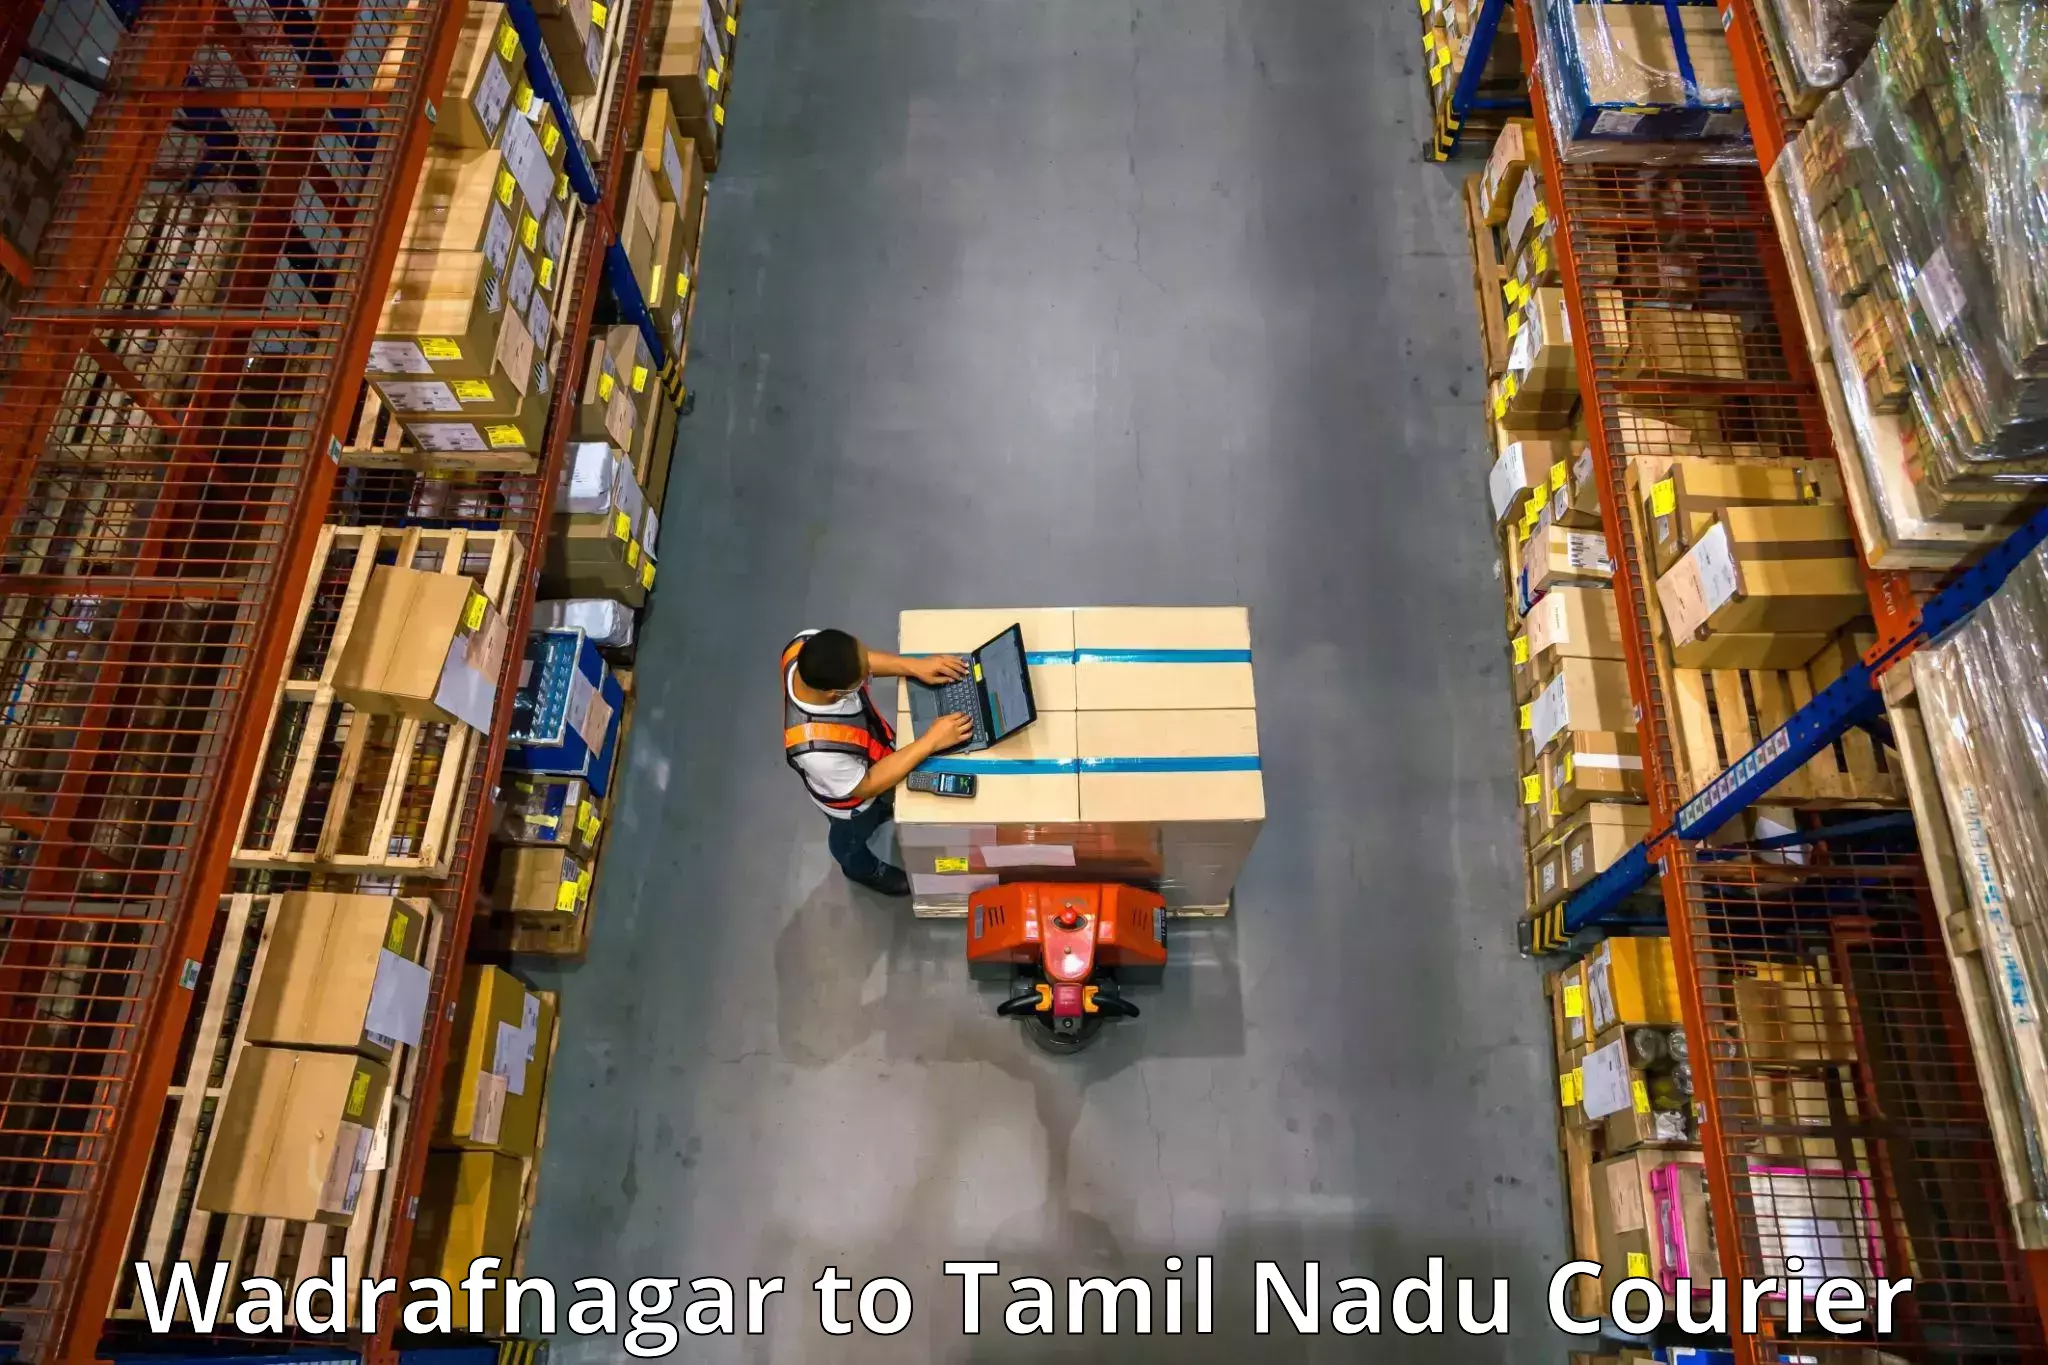 Furniture moving service Wadrafnagar to Meenakshi Academy of Higher Education and Research Chennai